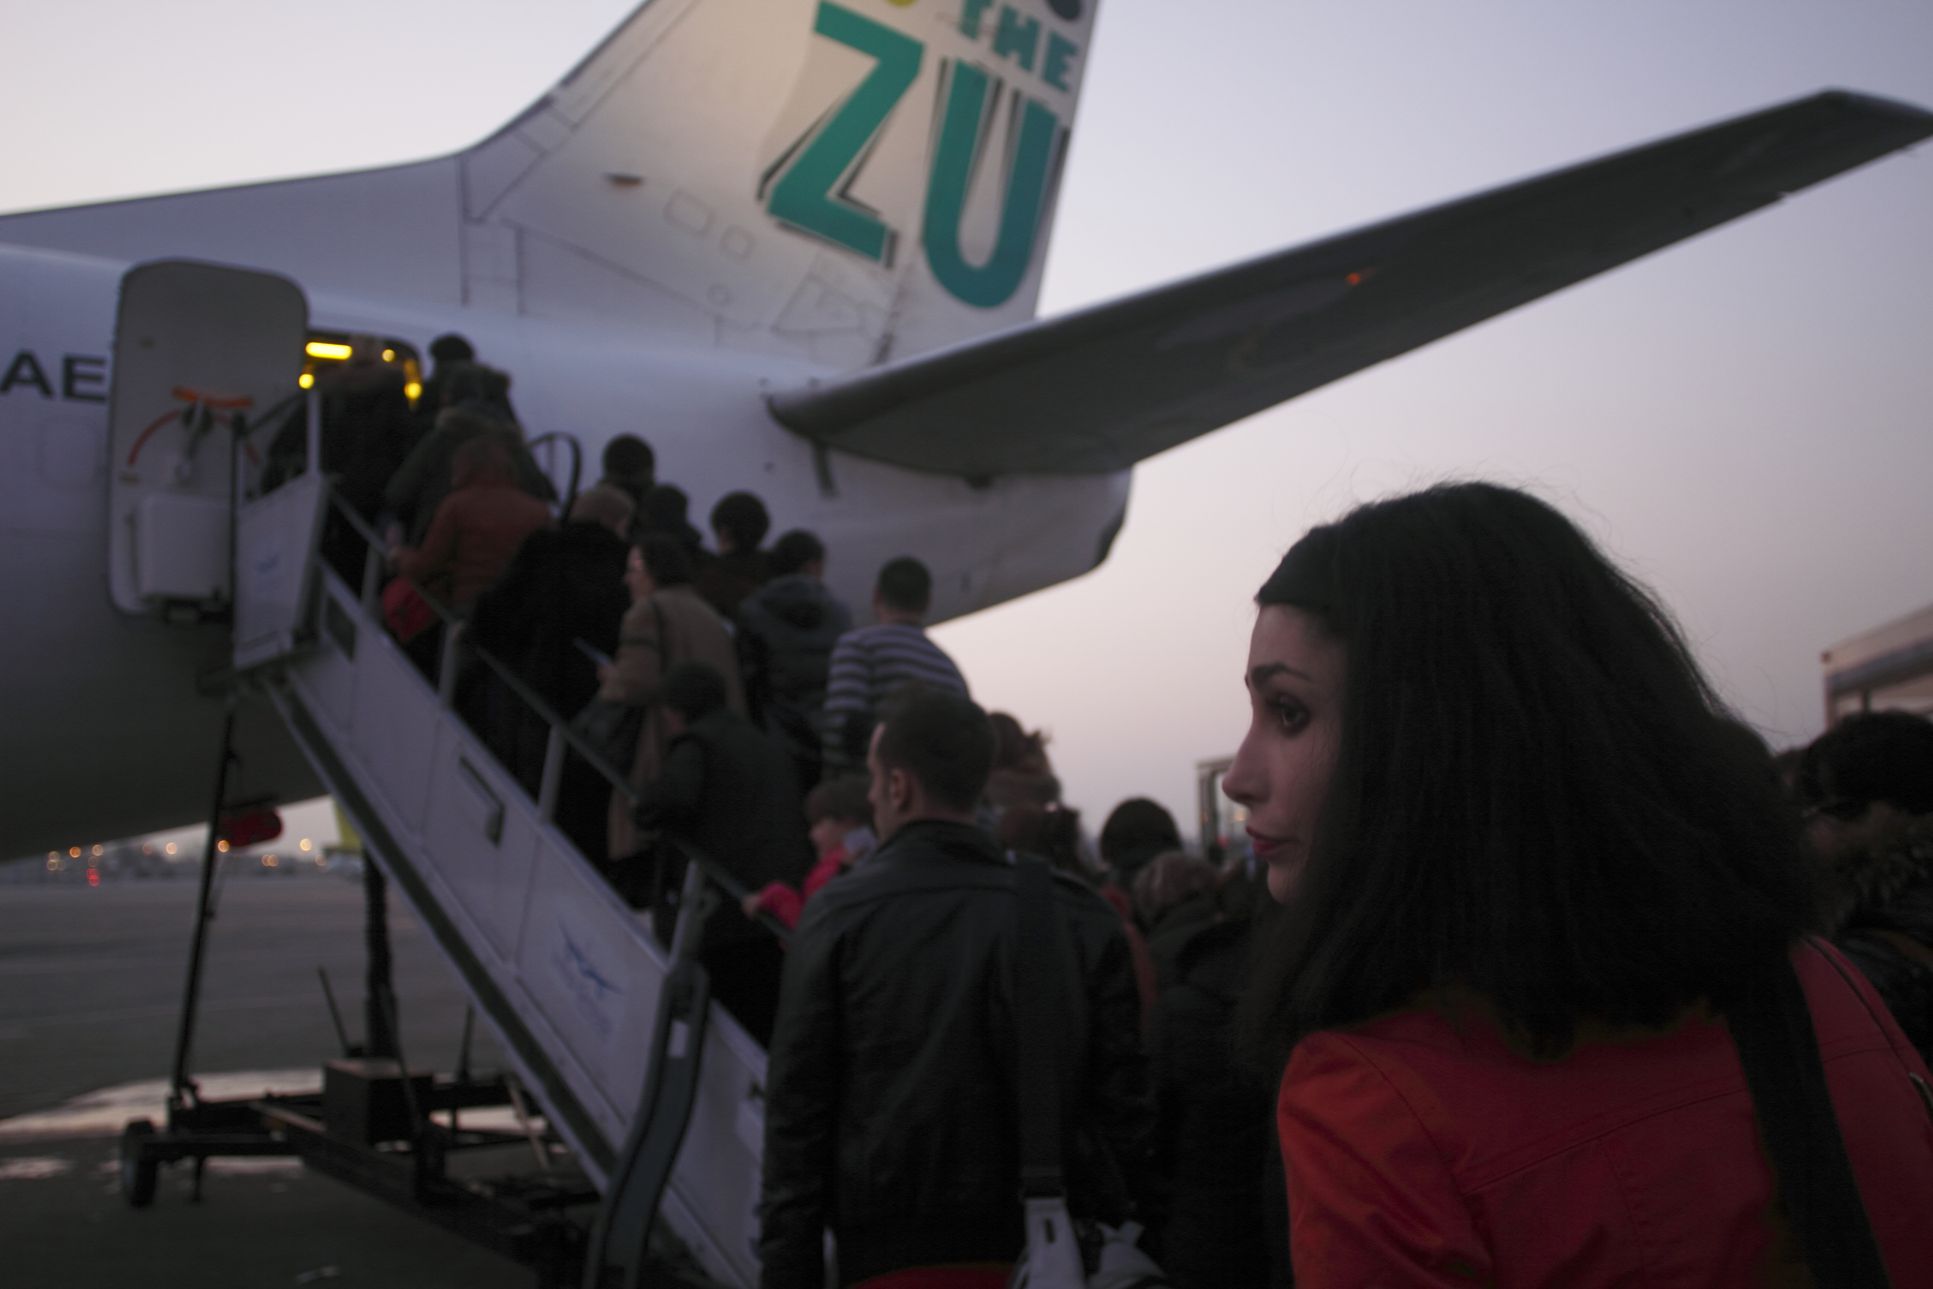 A woman stands in line to board an airplane, indicating the stressful experience of flying. 